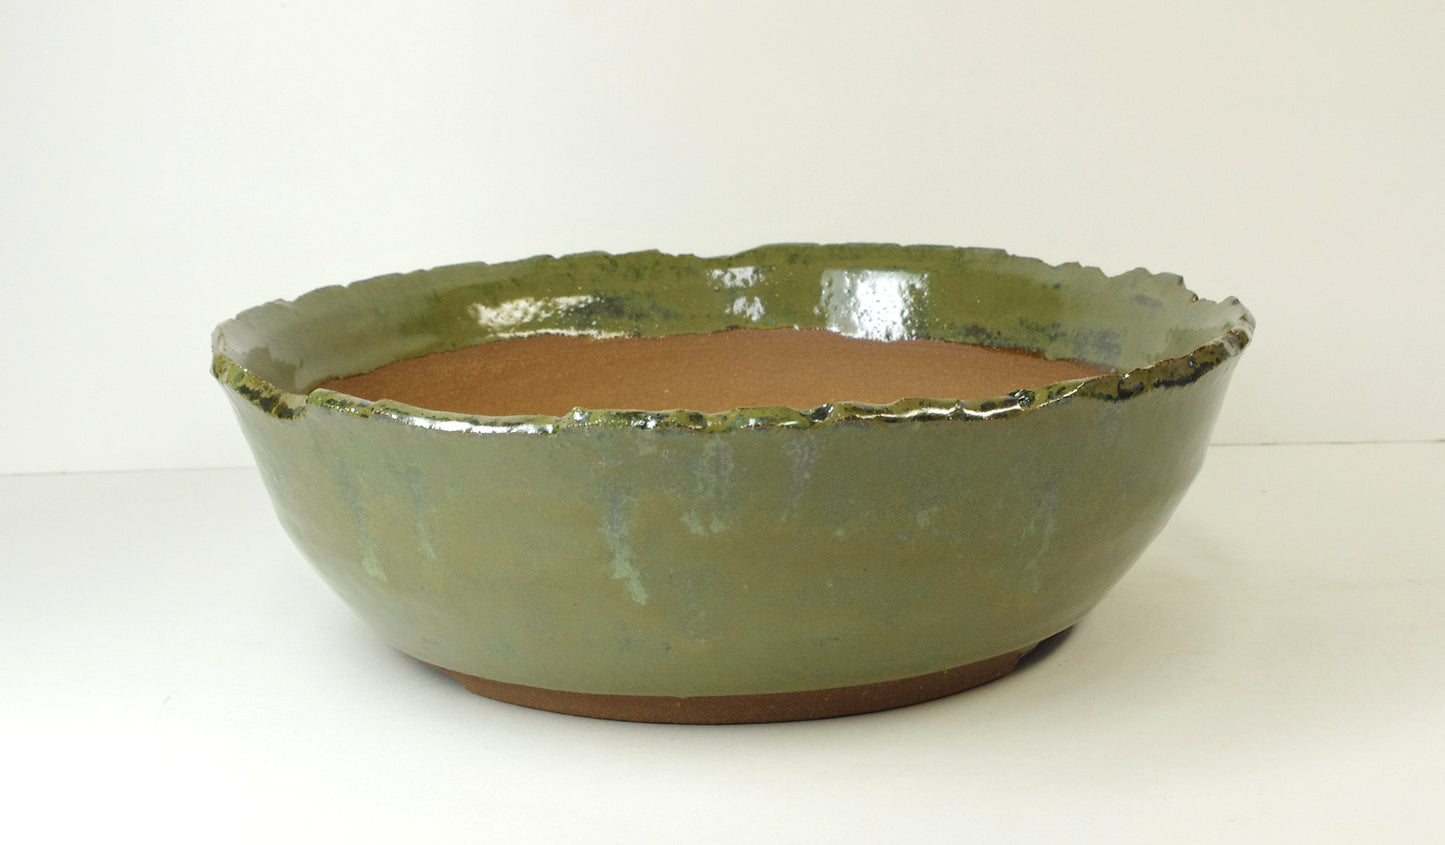 2081, Hand Thrown Stoneware Bonsai Pot with Altered Edge, Extra Wire Holes, Greens, Tans, Browns, 9 1/4 x 2 7/8